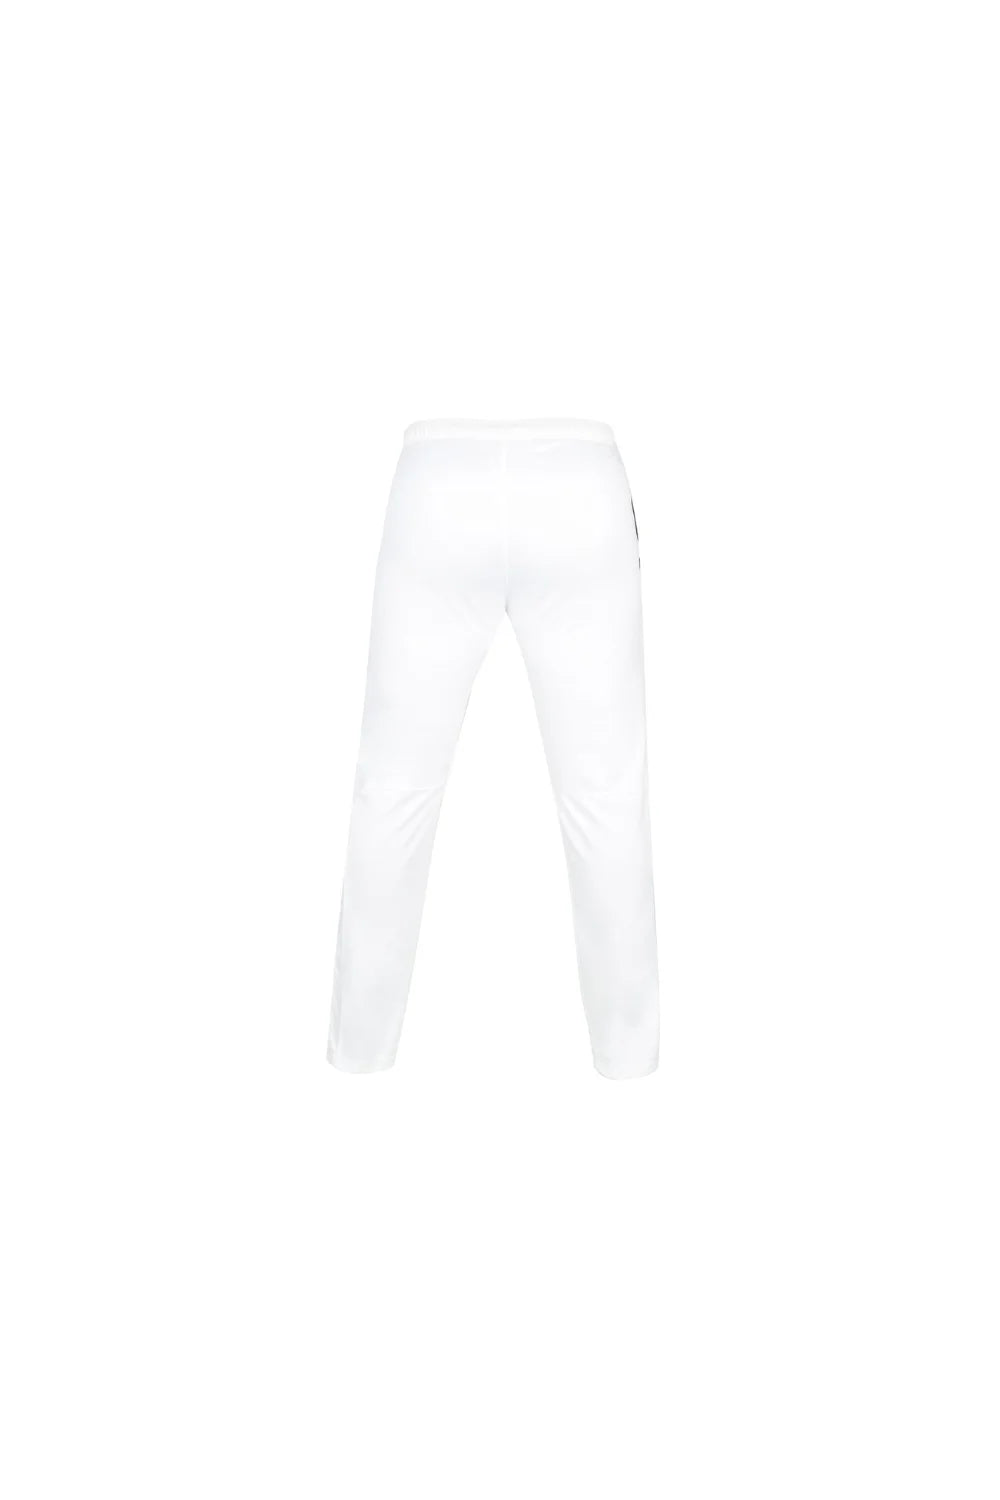 HENCO White LowerPentTrouser for Cricket Sports Yoga Volleyball  Tennis Officials Physical Training Cycling Badminton Gym  Fitness  Wear for MenWomen BoyGirl XS34  Amazonin Clothing  Accessories